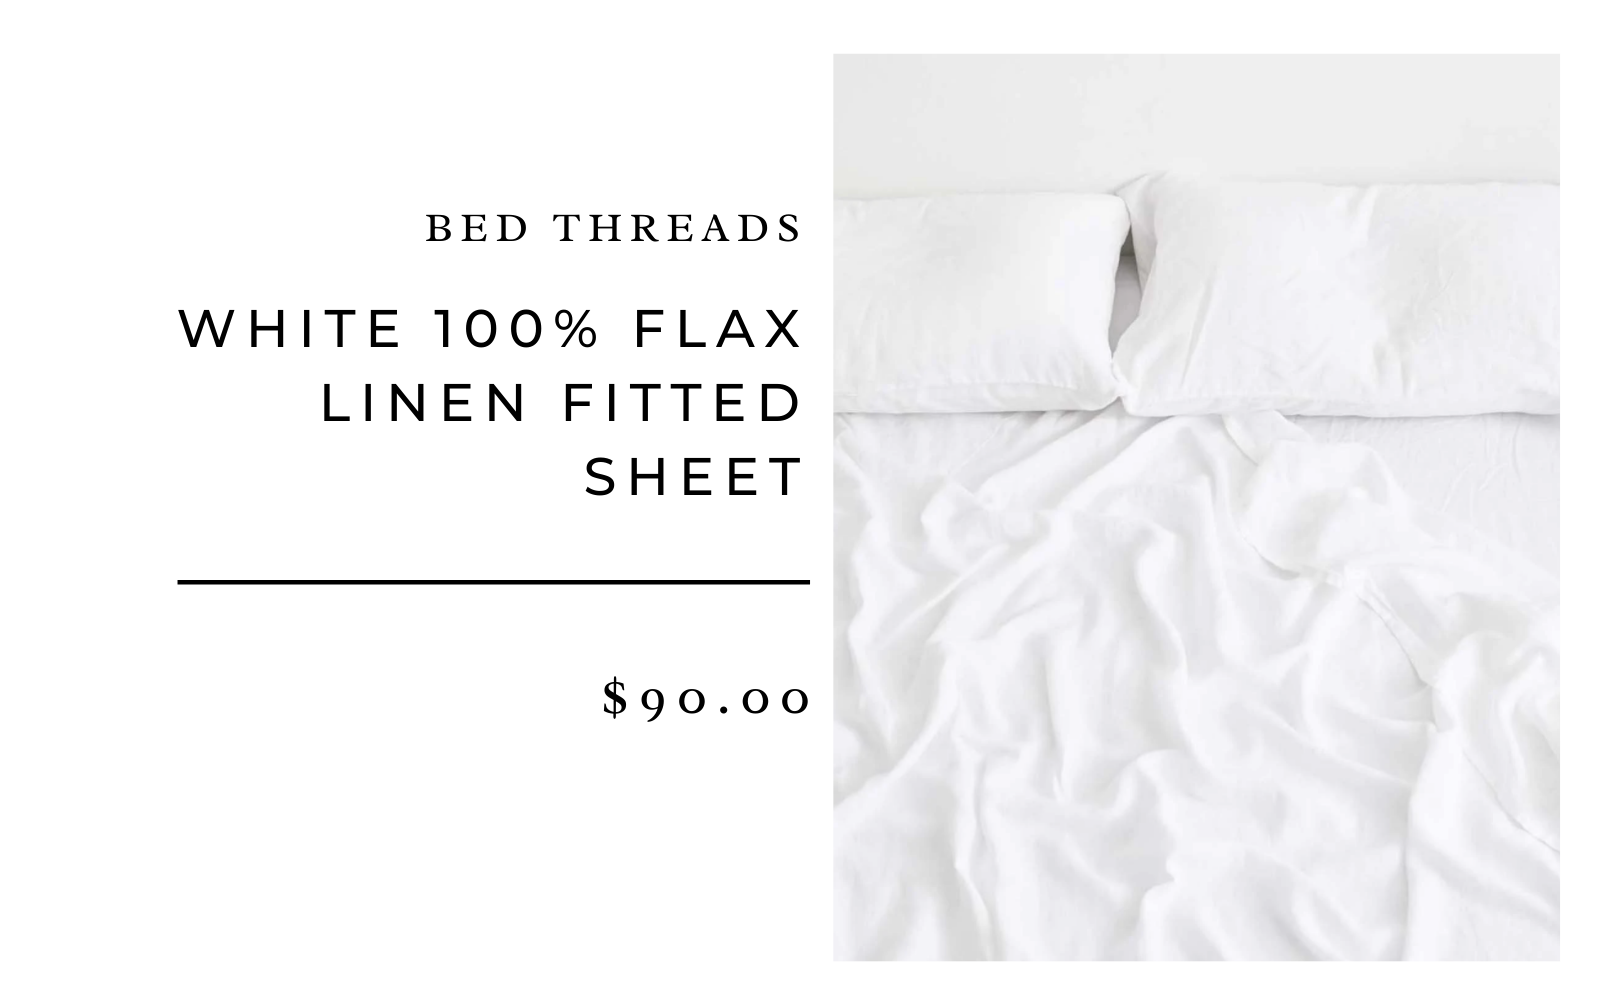 Bed Threads White 100% Flax Linen Fitted Sheet